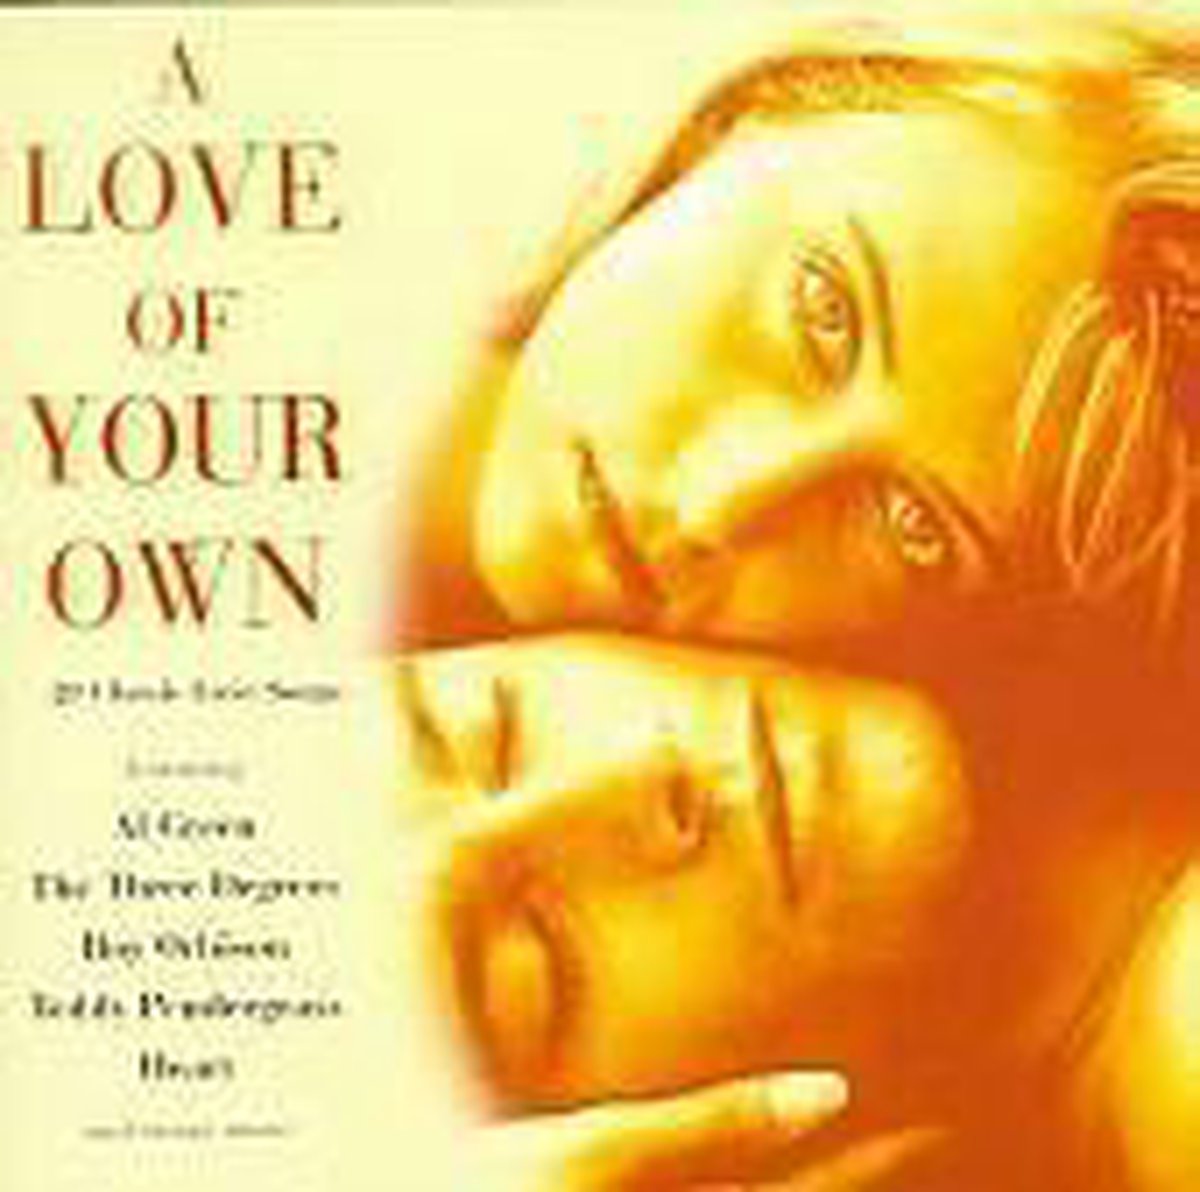 Love of Your Own - various artists